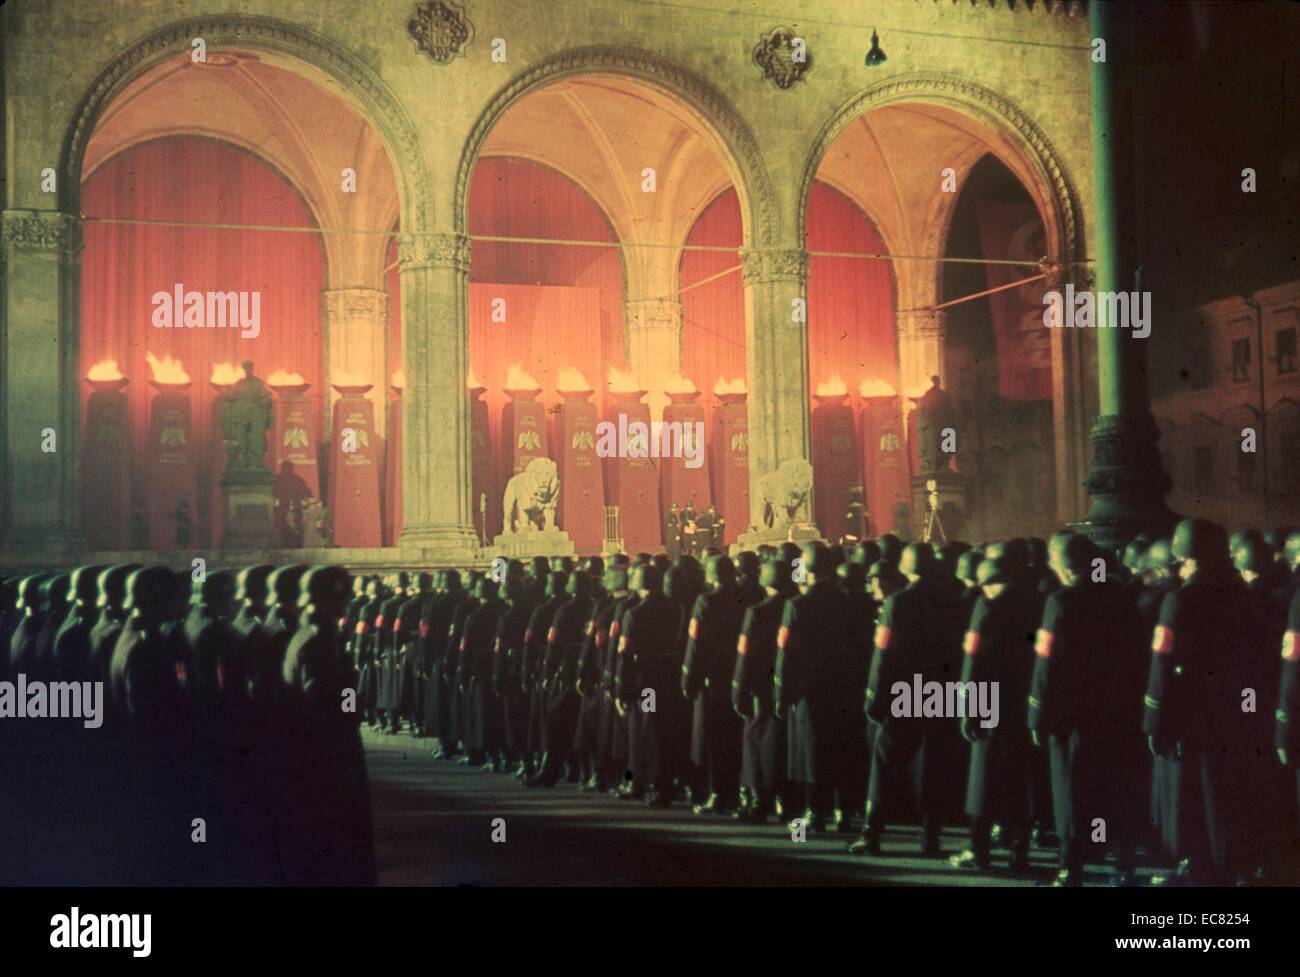 Colour image shows the gathering of the annual midnight swearing-in of Nazi SS troops. Every year the Nazi troops would have to swear an oath of loyalty. The oath read - “I vow to you, Adolf Hitler, as Führer and chancellor of the German Reich, loyalty and bravery. I vow to you and to the leaders that you set for me, absolute allegiance until death. So help me God.” Feldherrnhalle, Munich 1938. Stock Photo